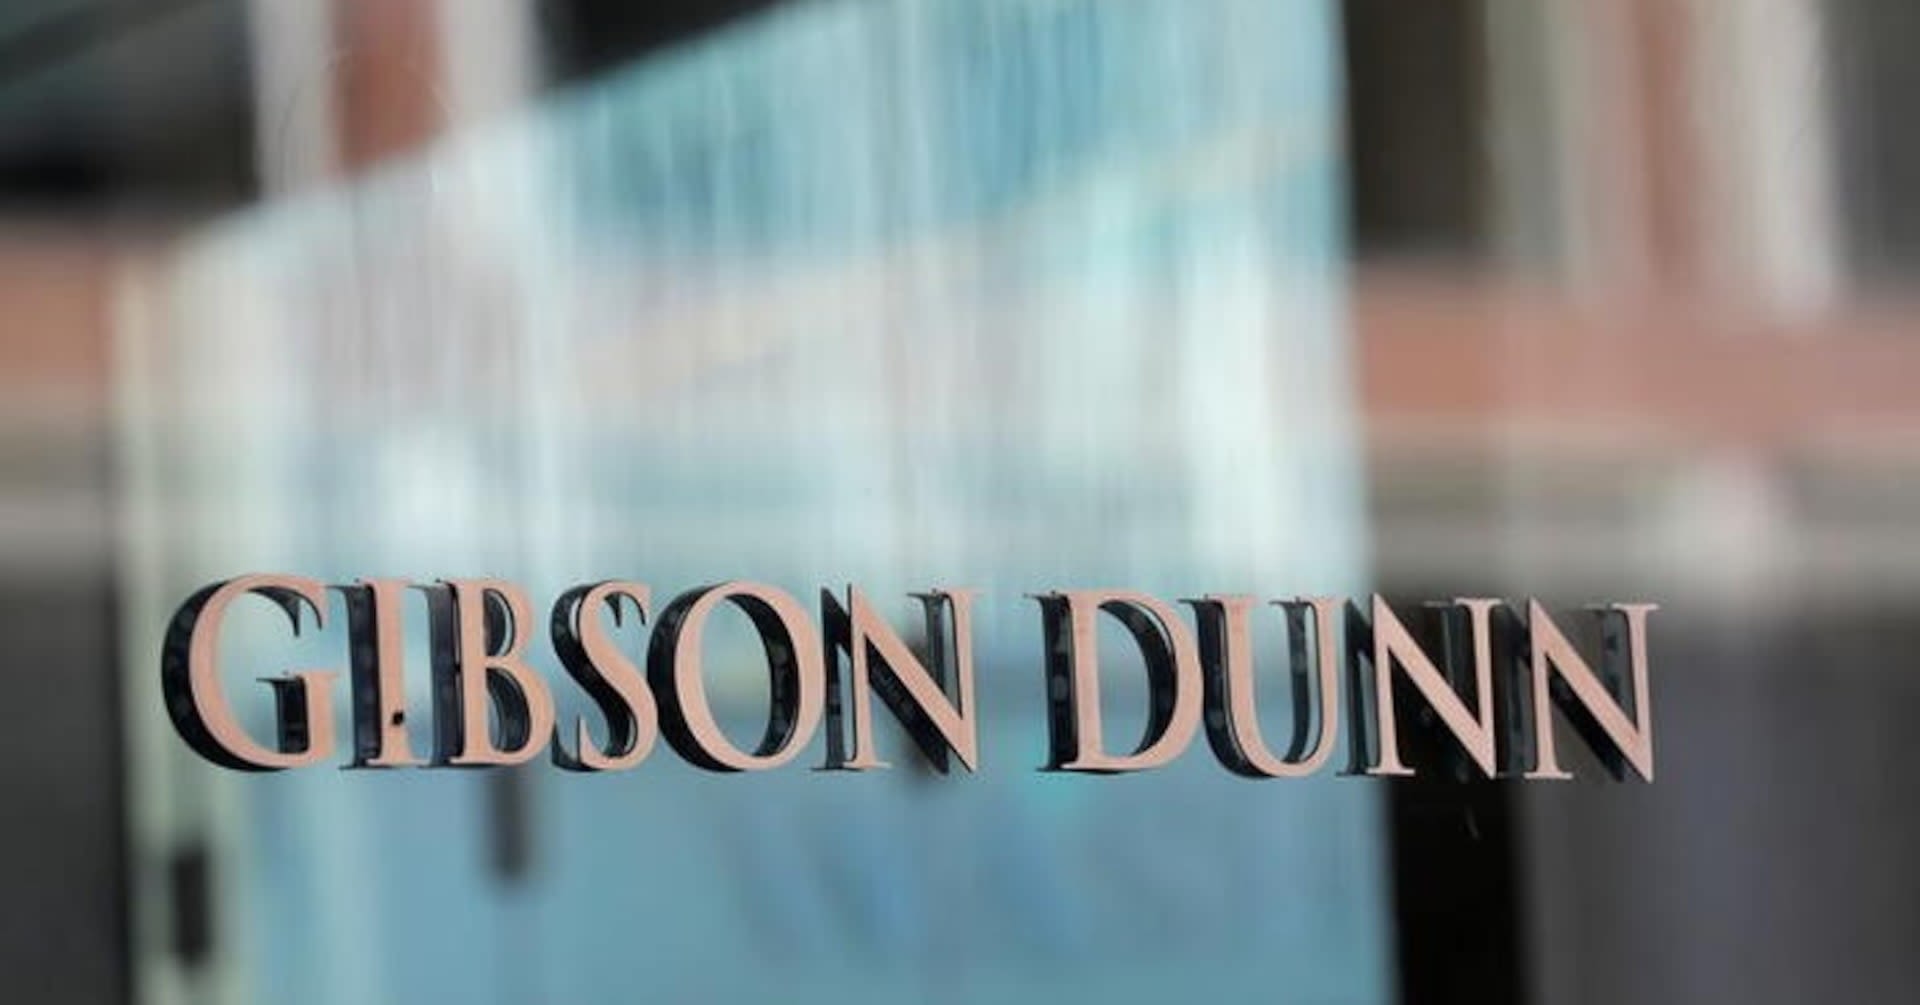 Law firm Gibson Dunn taps deal makers from Sullivan & Cromwell, Paul Weiss